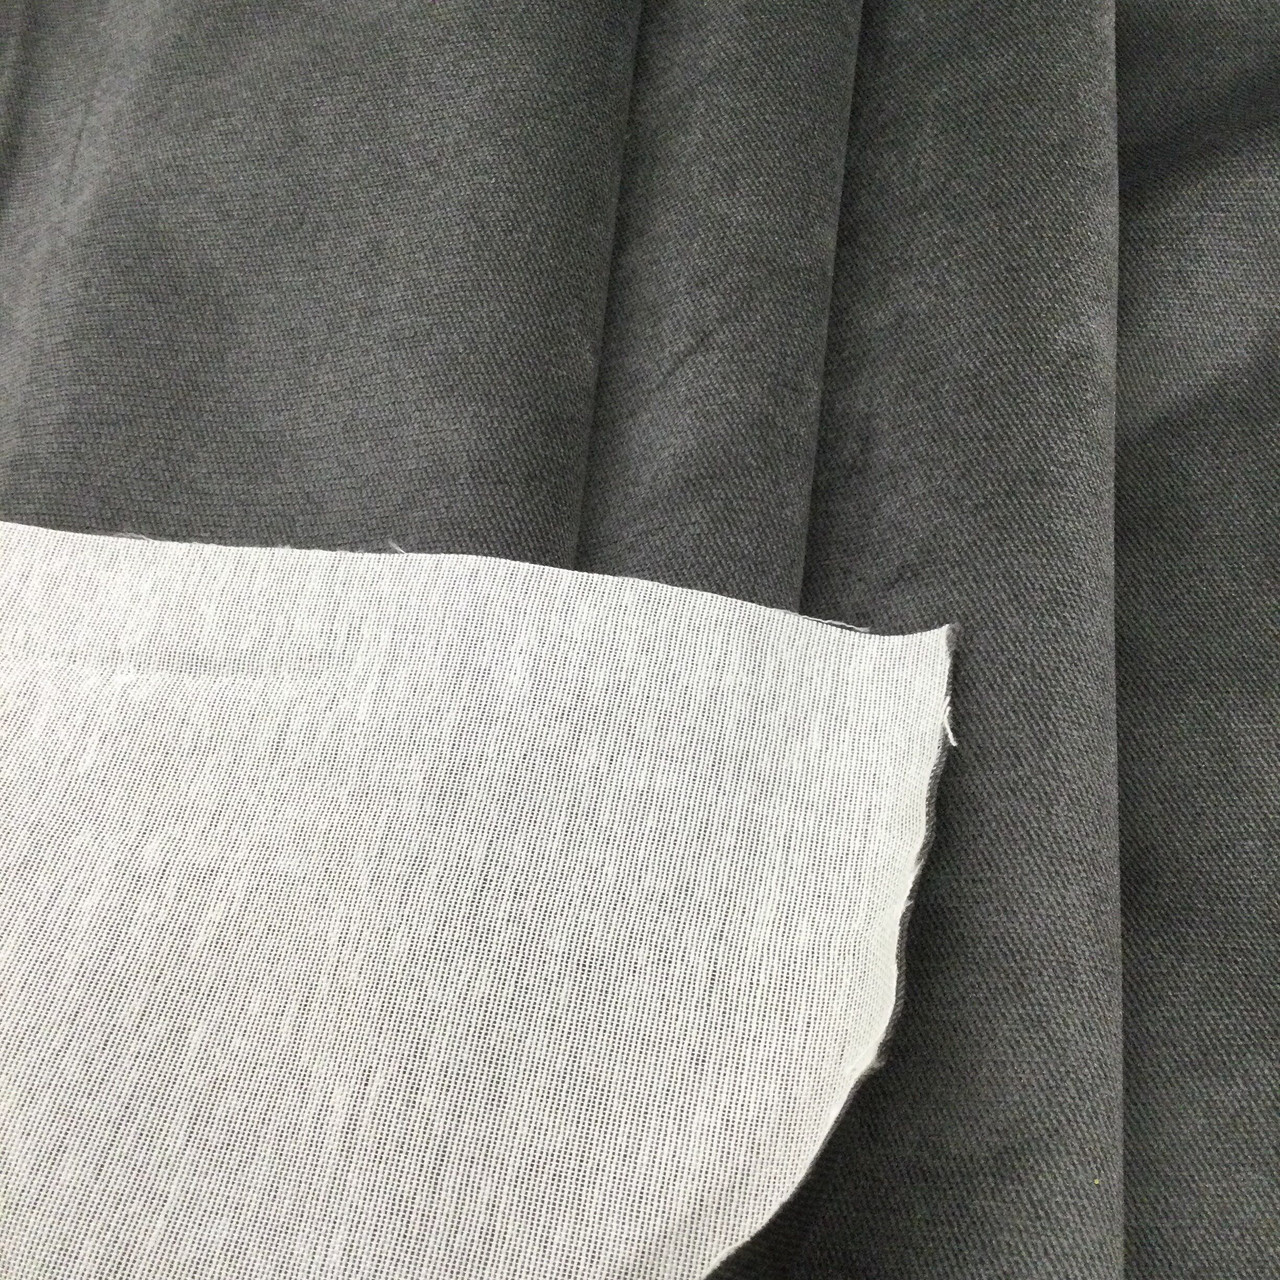 CHARCOAL GREY - PLUSH VELVET upholstery fabric material 460GSM - 56 width